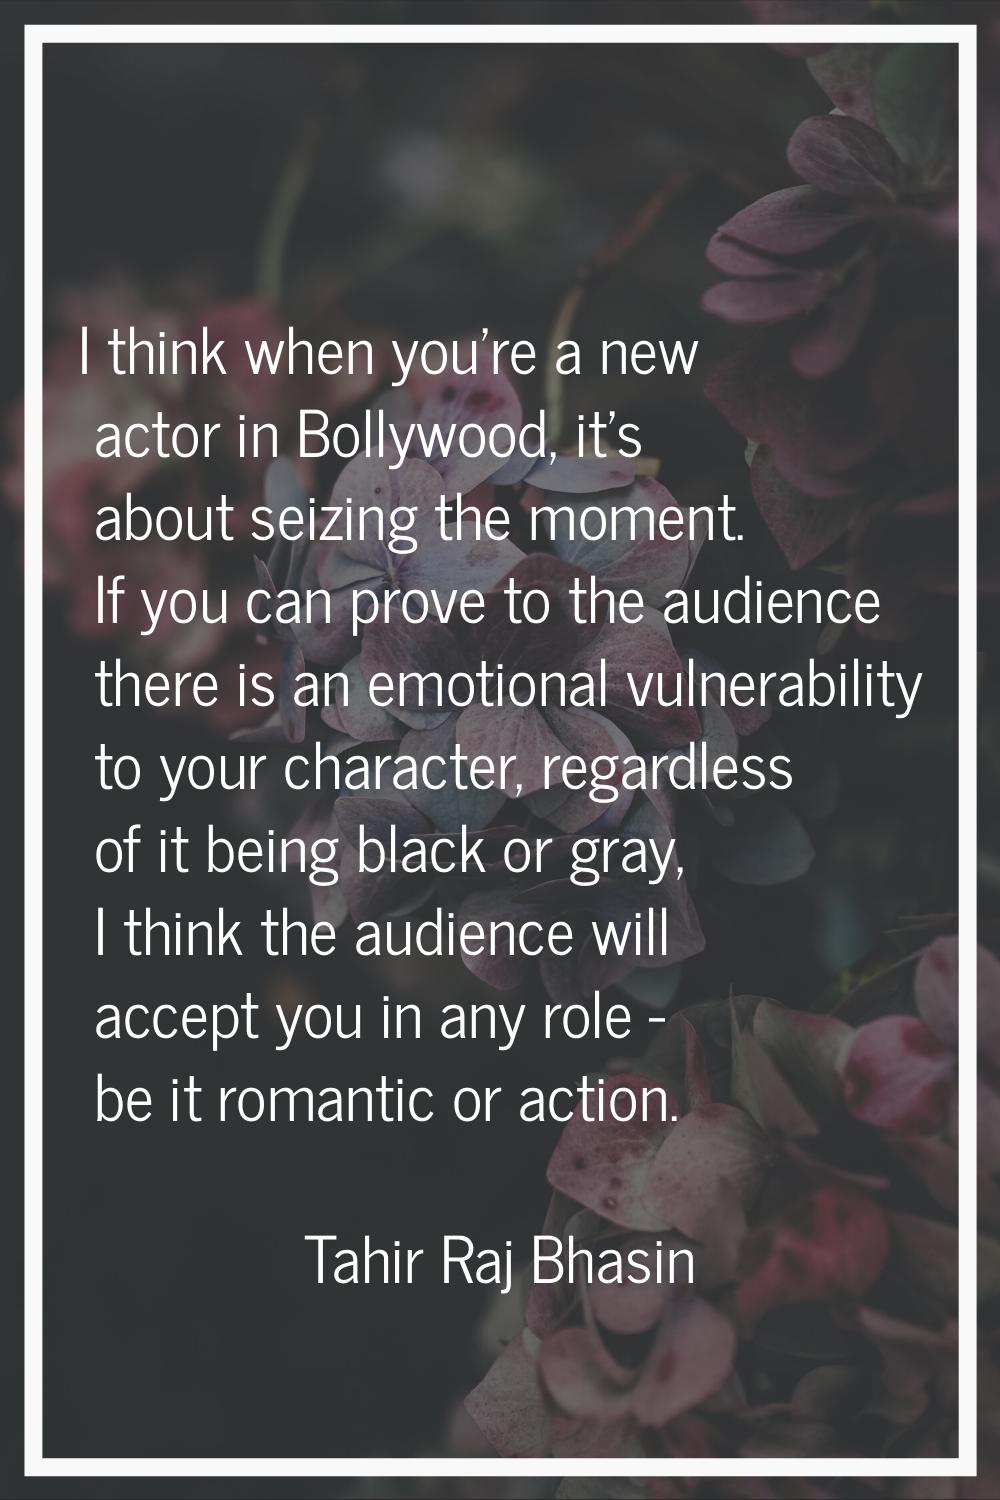 I think when you're a new actor in Bollywood, it's about seizing the moment. If you can prove to th